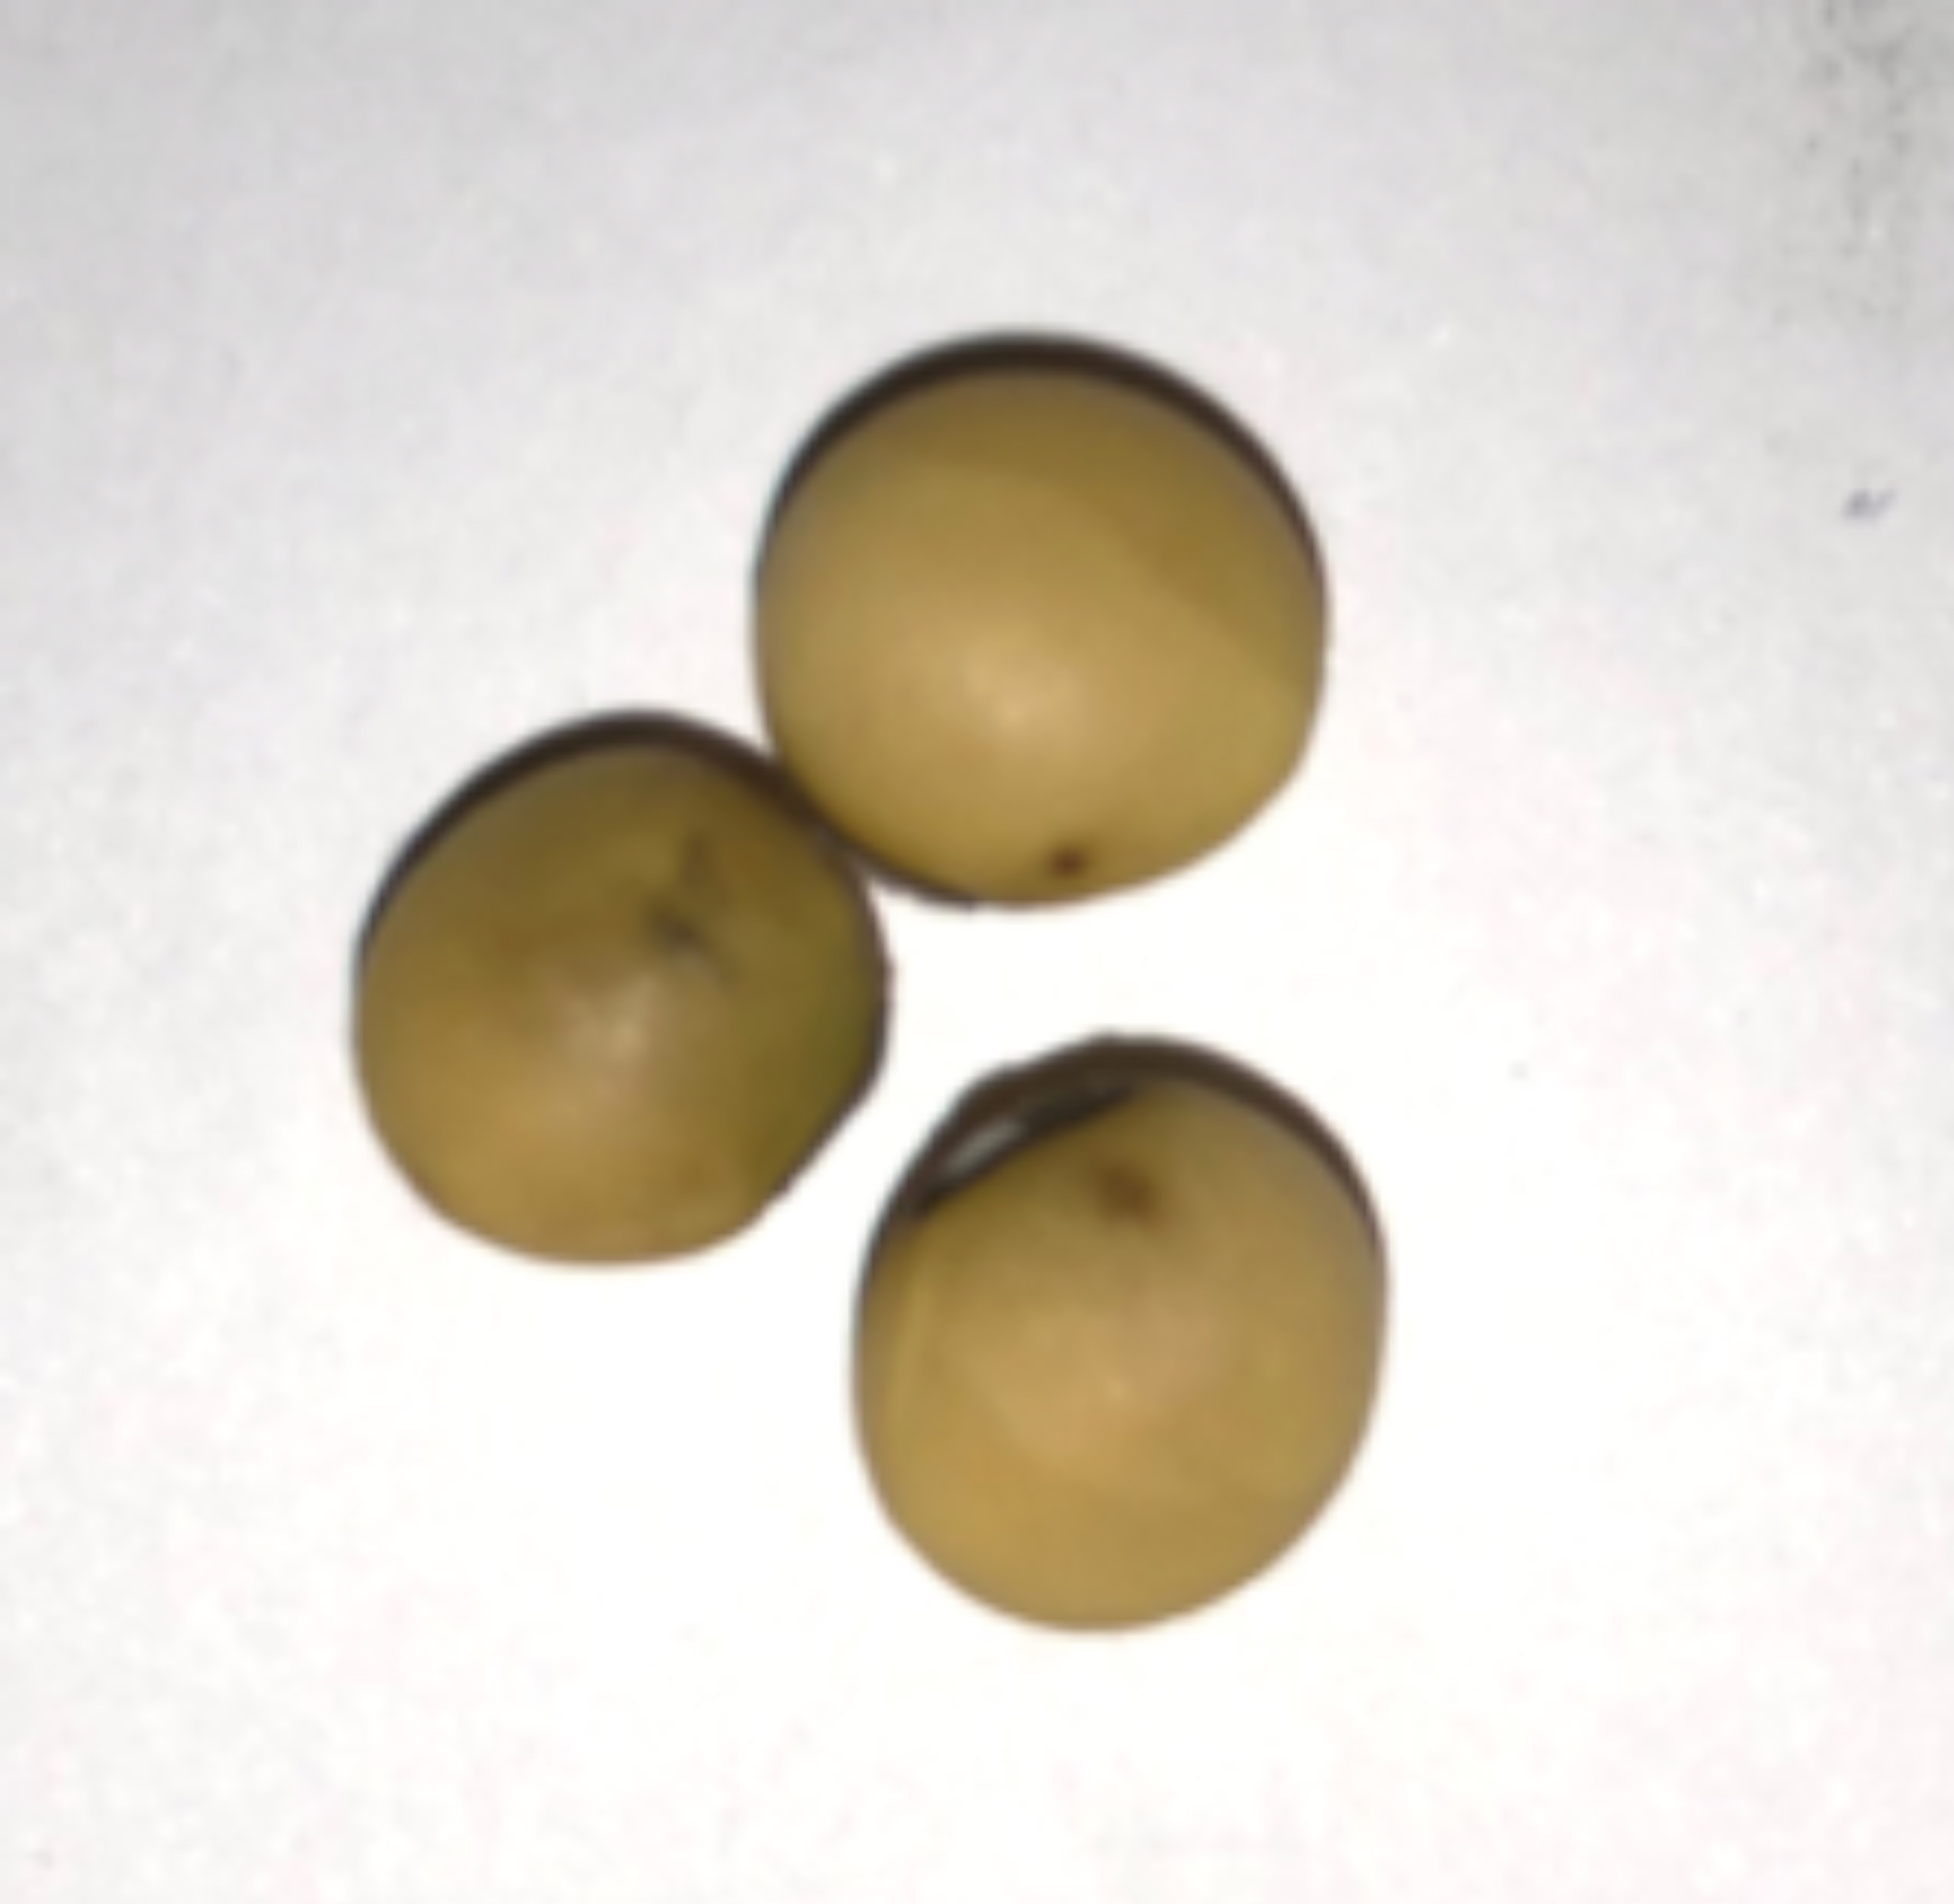 Yellow soybean seeds with dark brown spots on the seed coat.